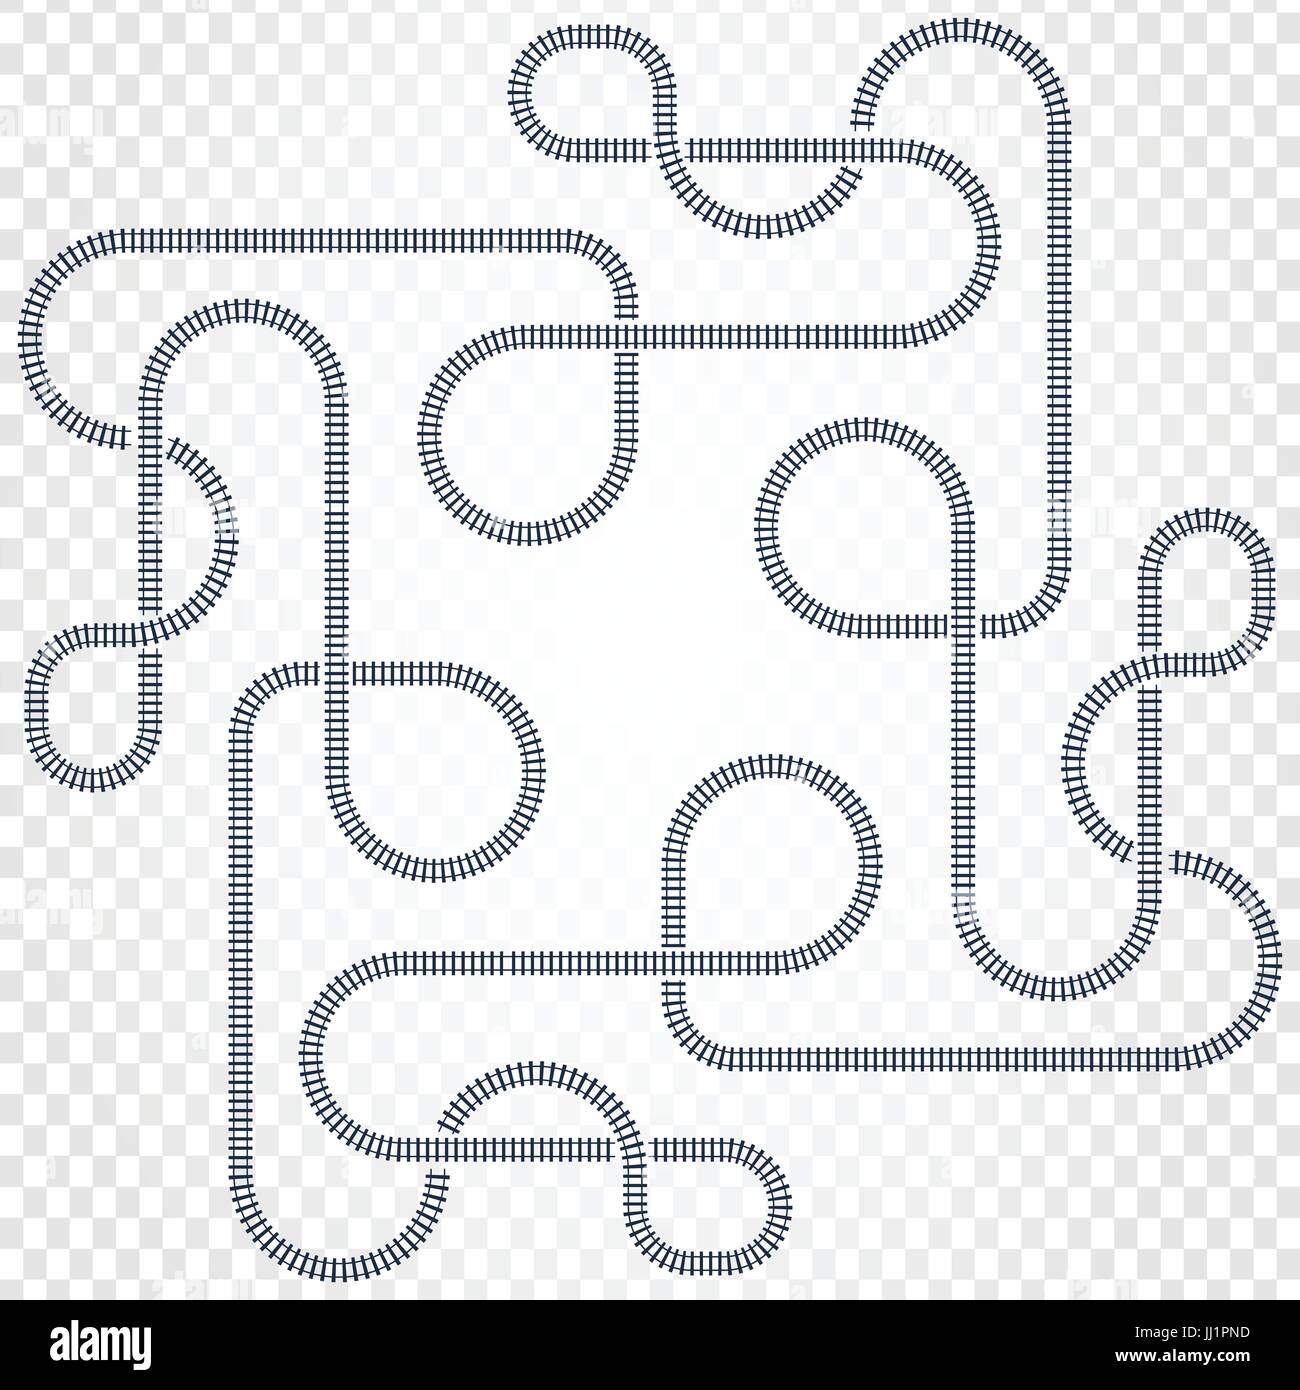 Railway line, labyrinth and nodes. Map of the tramway for trains with turns and bridges vector illustration Stock Vector